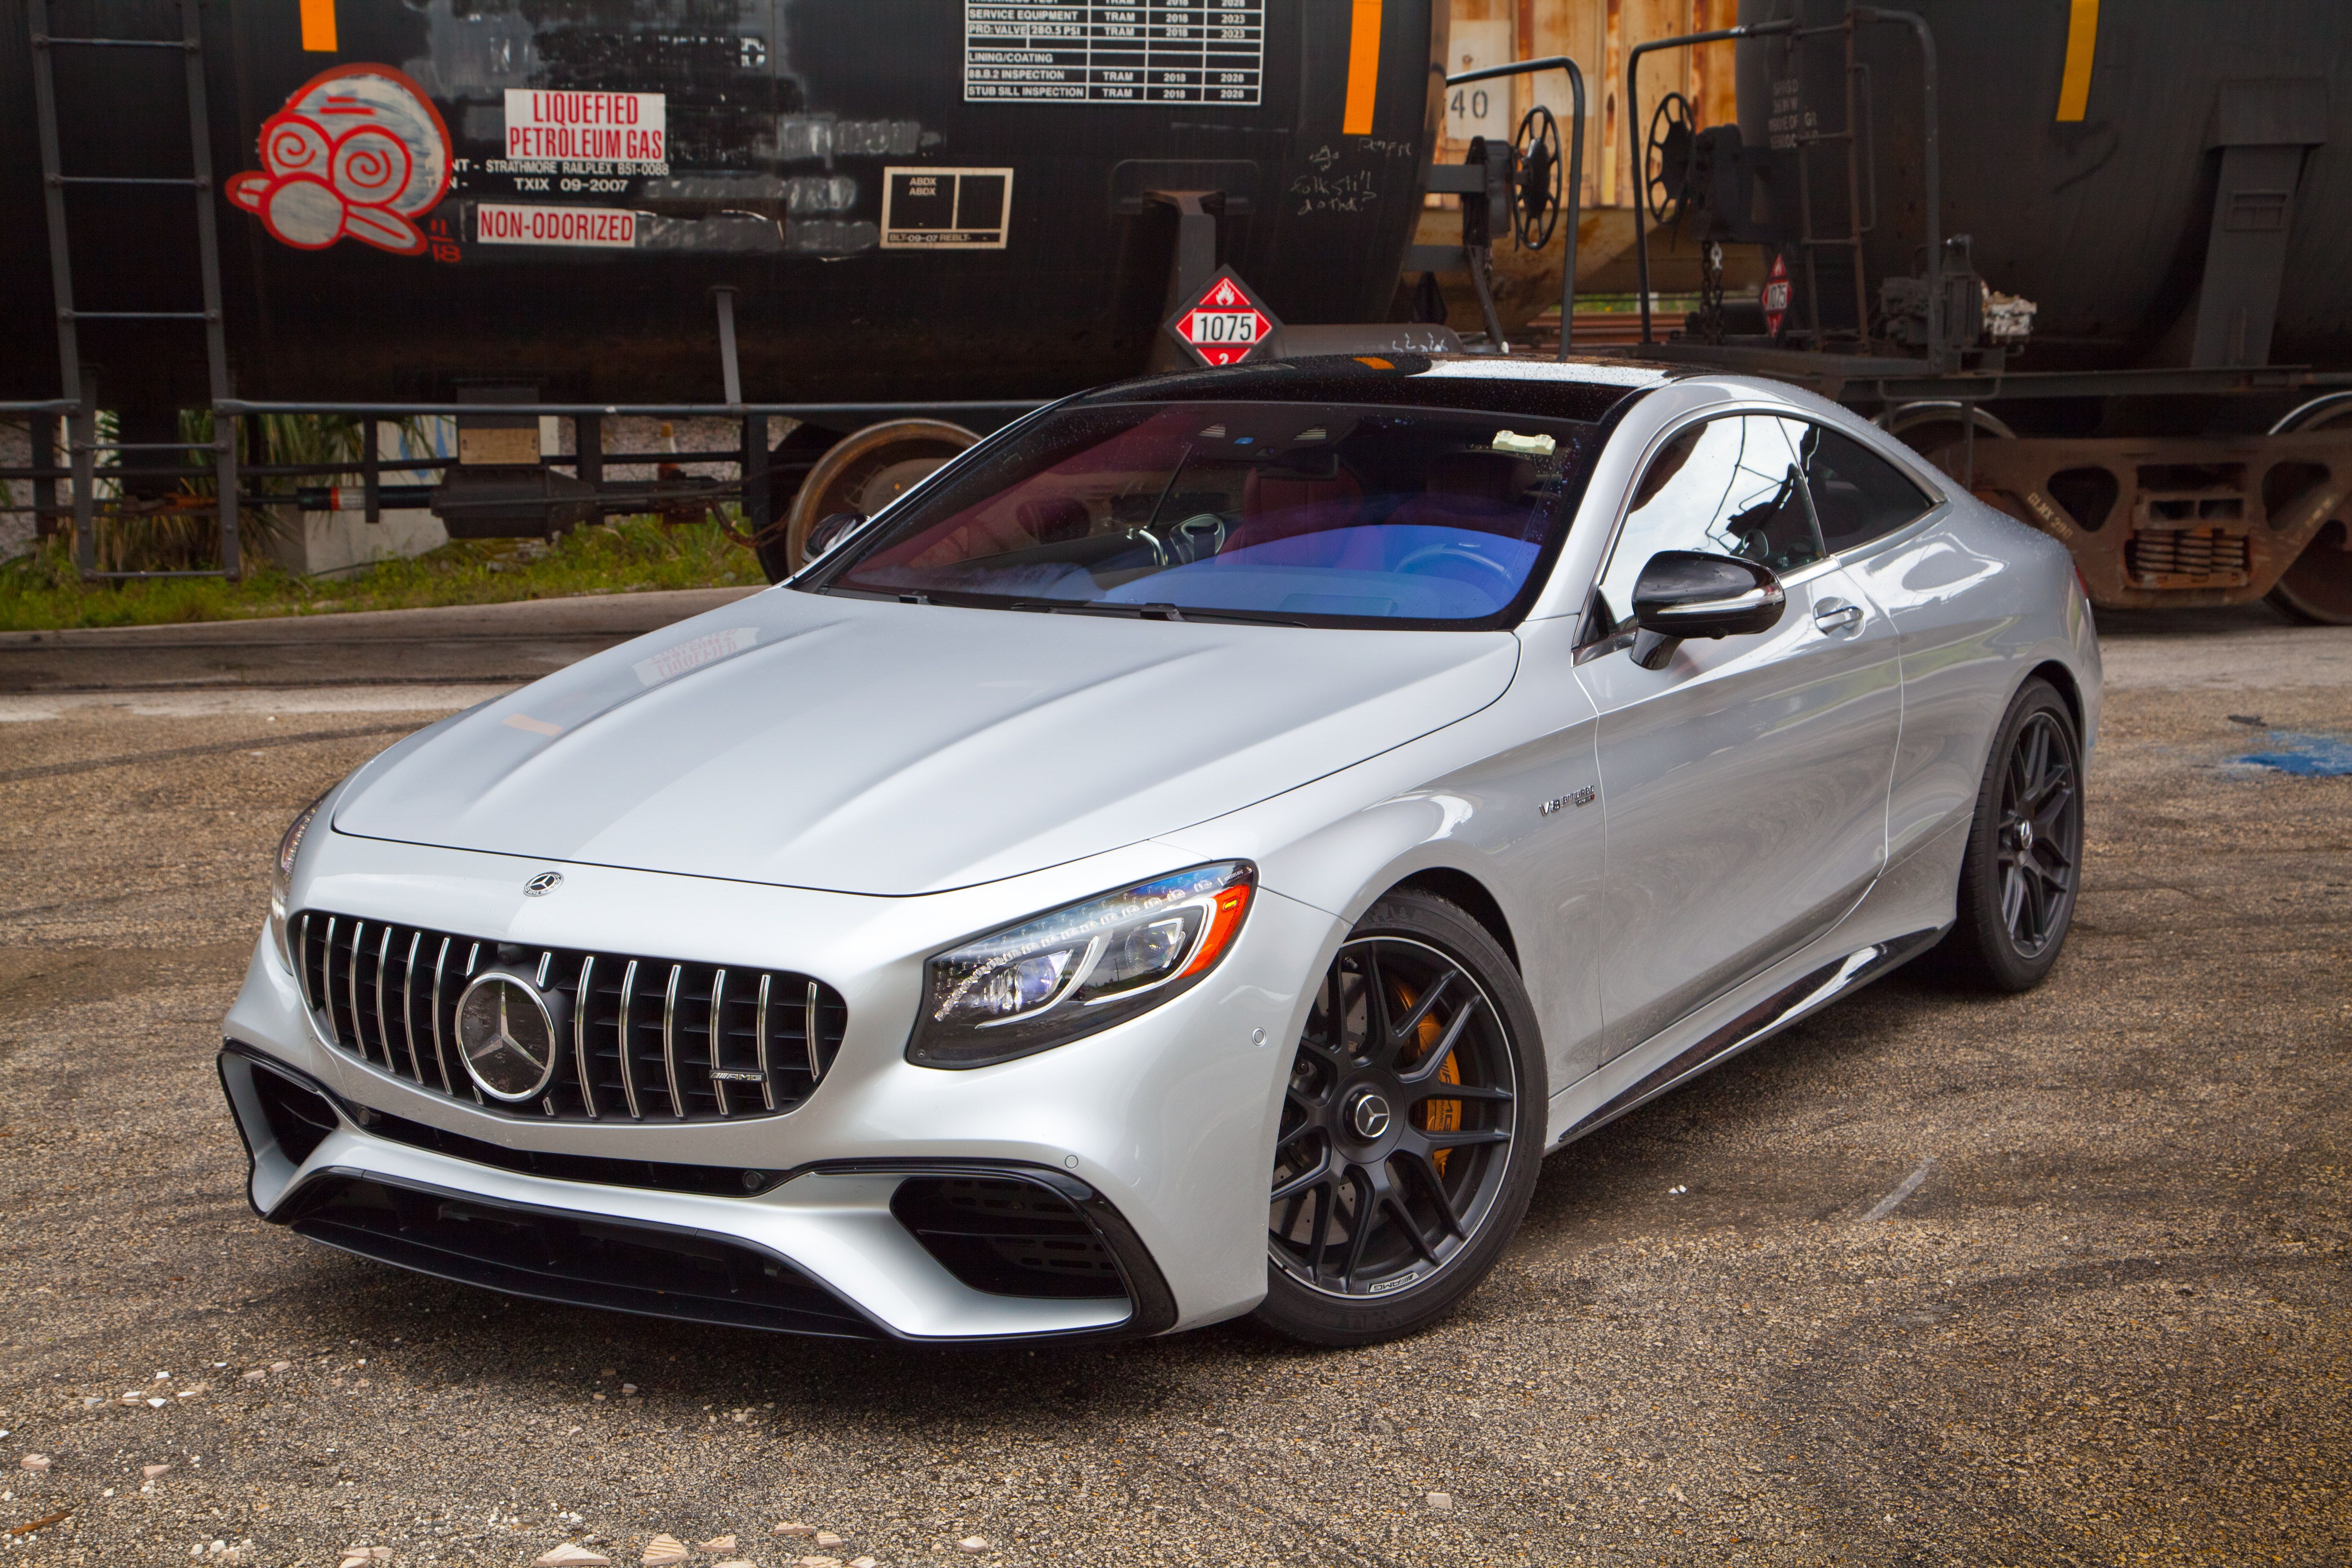 2019 Mercedes-AMG S 63 Coupe - Driven